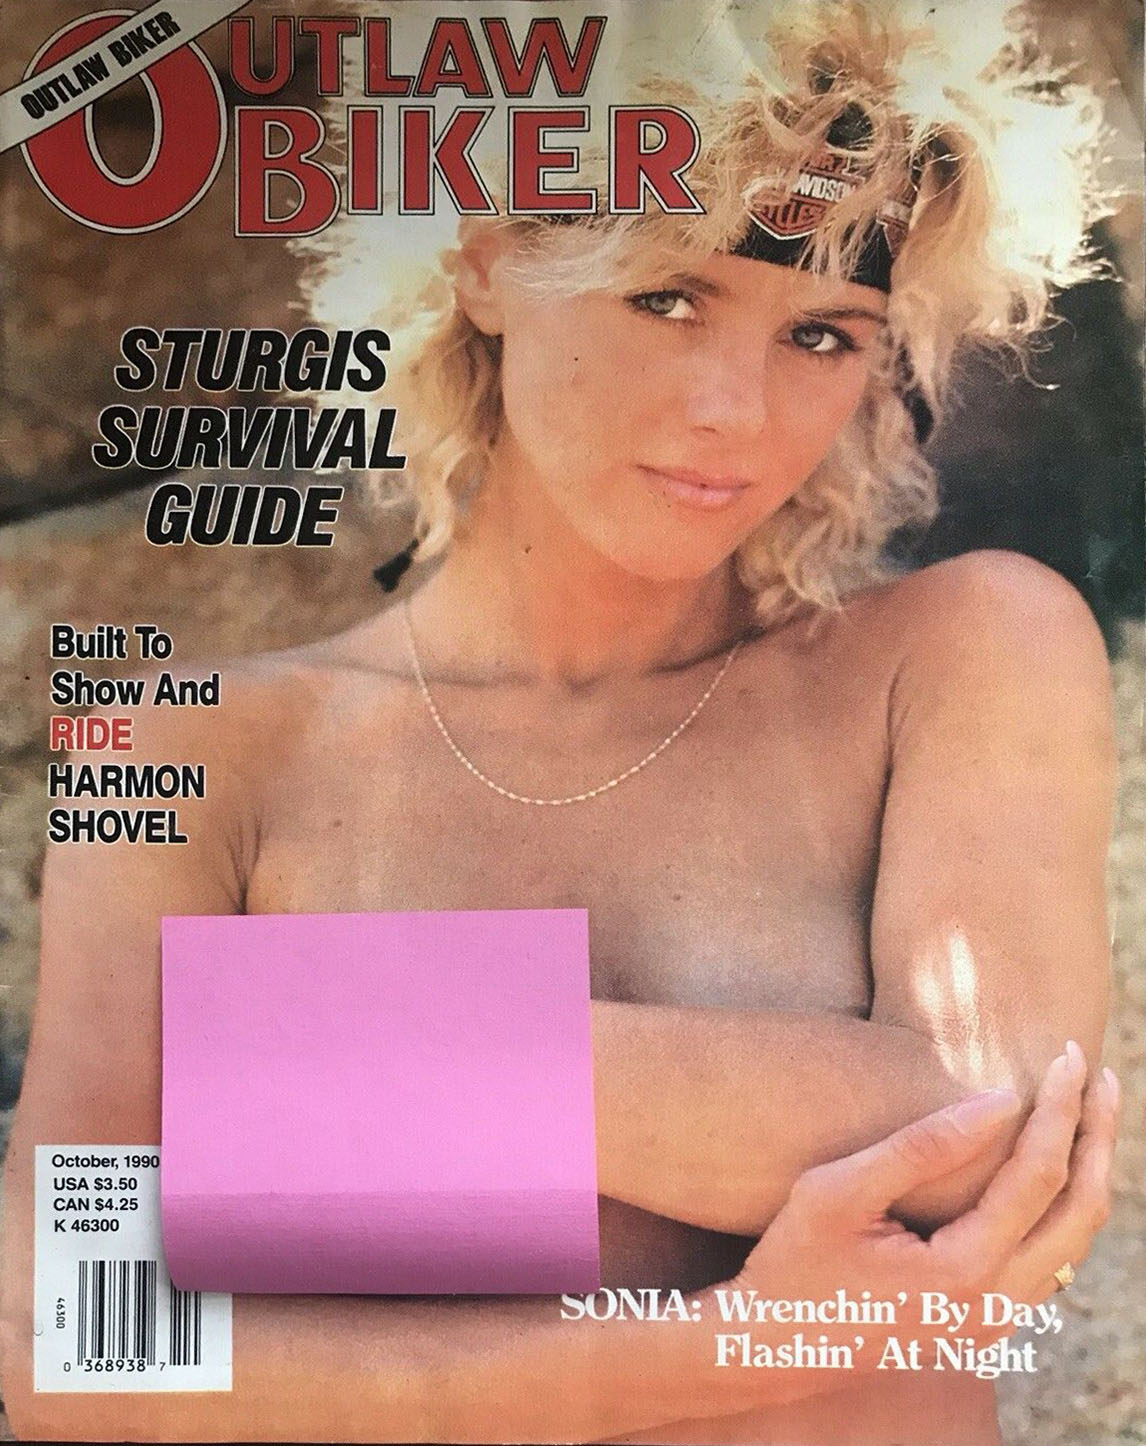 Outlaw Biker October 1990 magazine back issue Outlaw Biker magizine back copy Outlaw Biker October 1990 Magazine Back Issue for Bike Riding Rebels and Members of Outlaw Motorcycle Clubs. Sturgis Survival Guide.